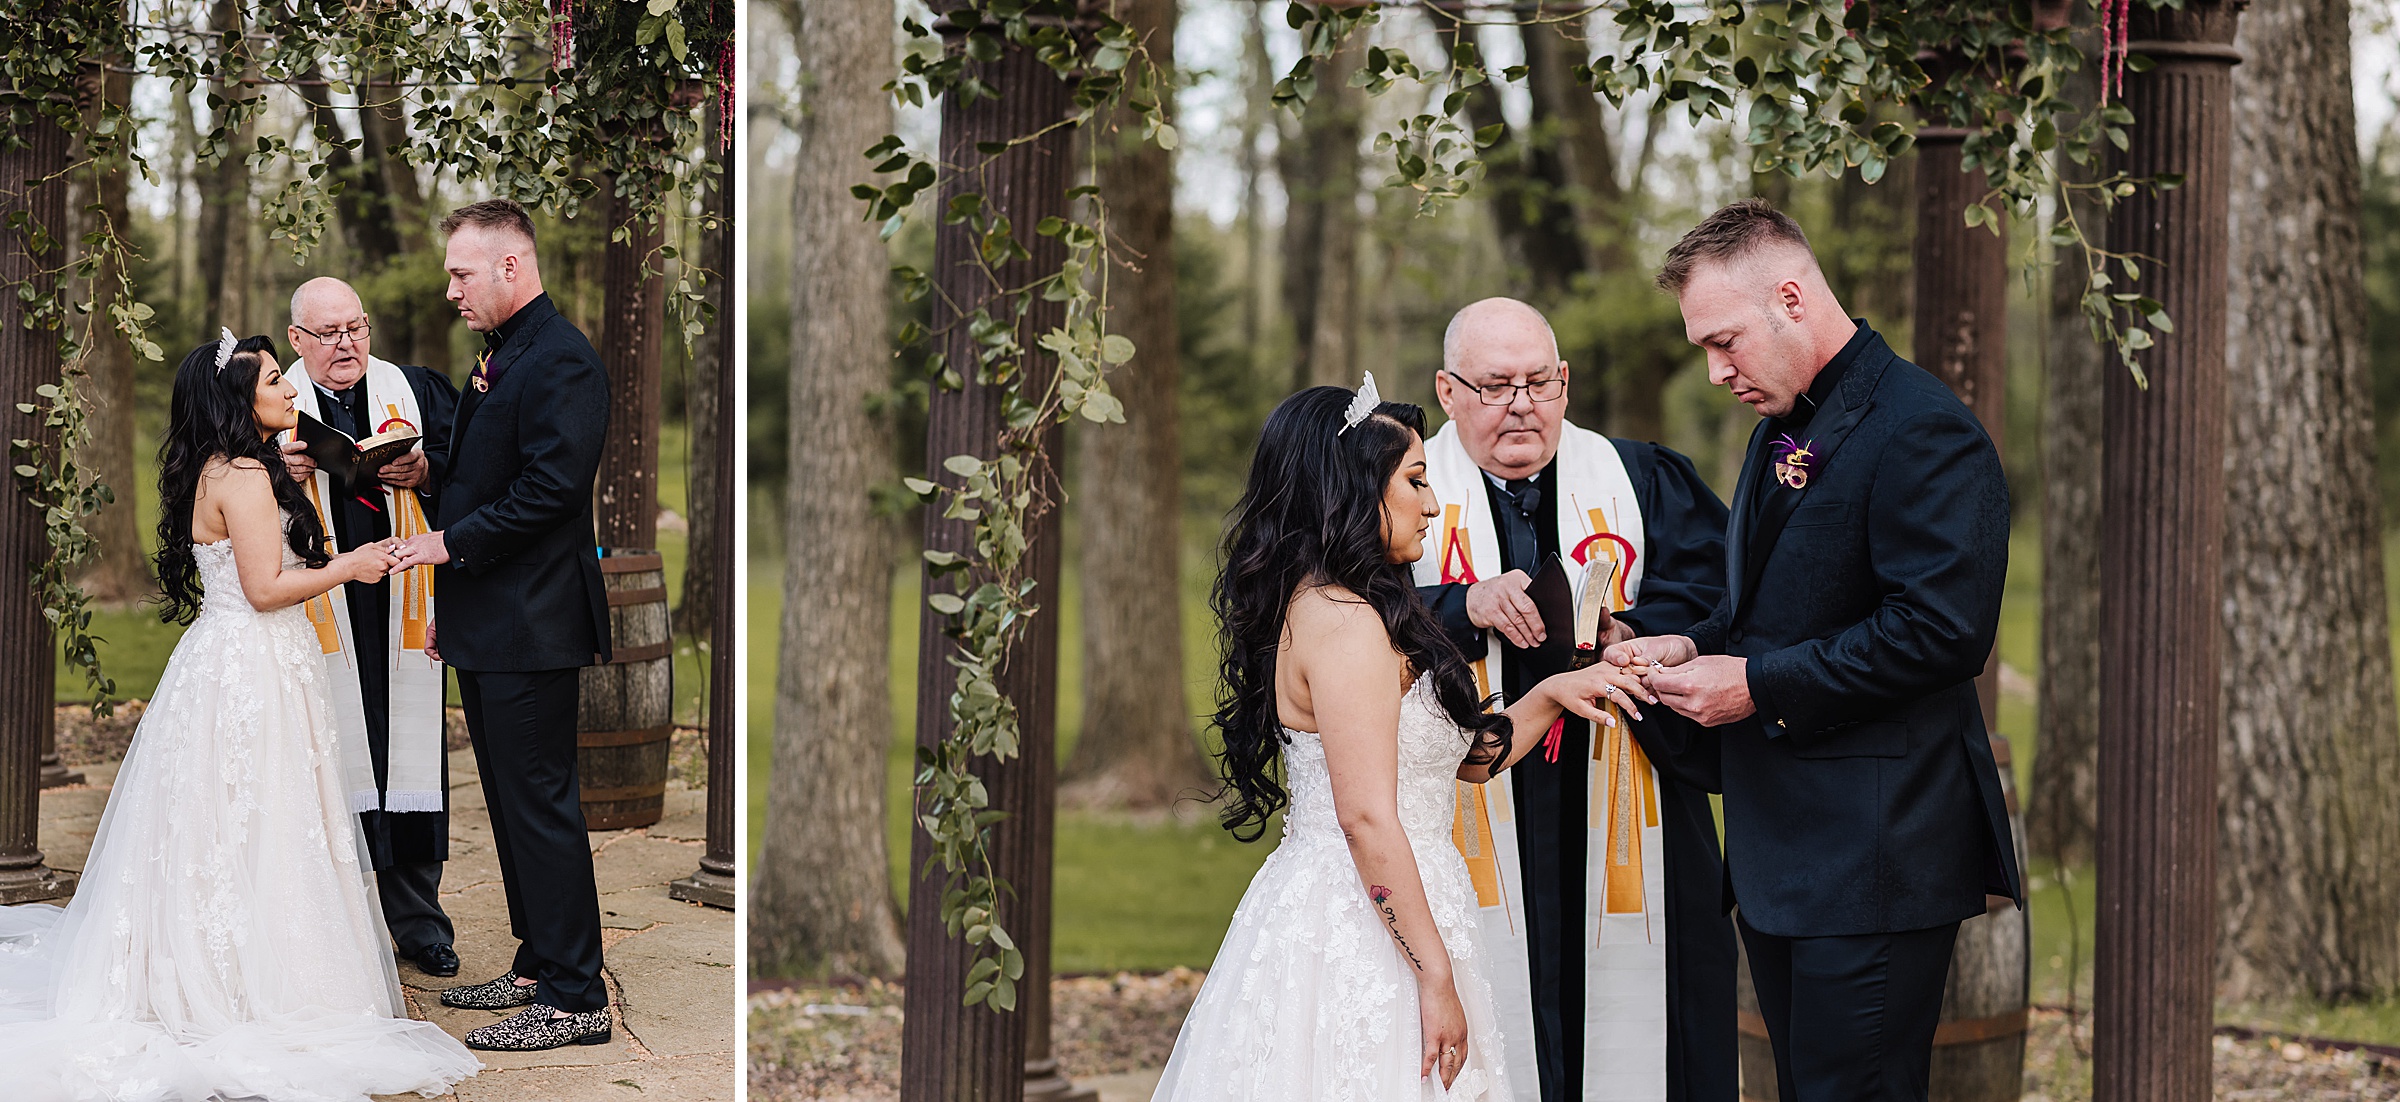 bride and groom exchanging rings in outdoor ceremony